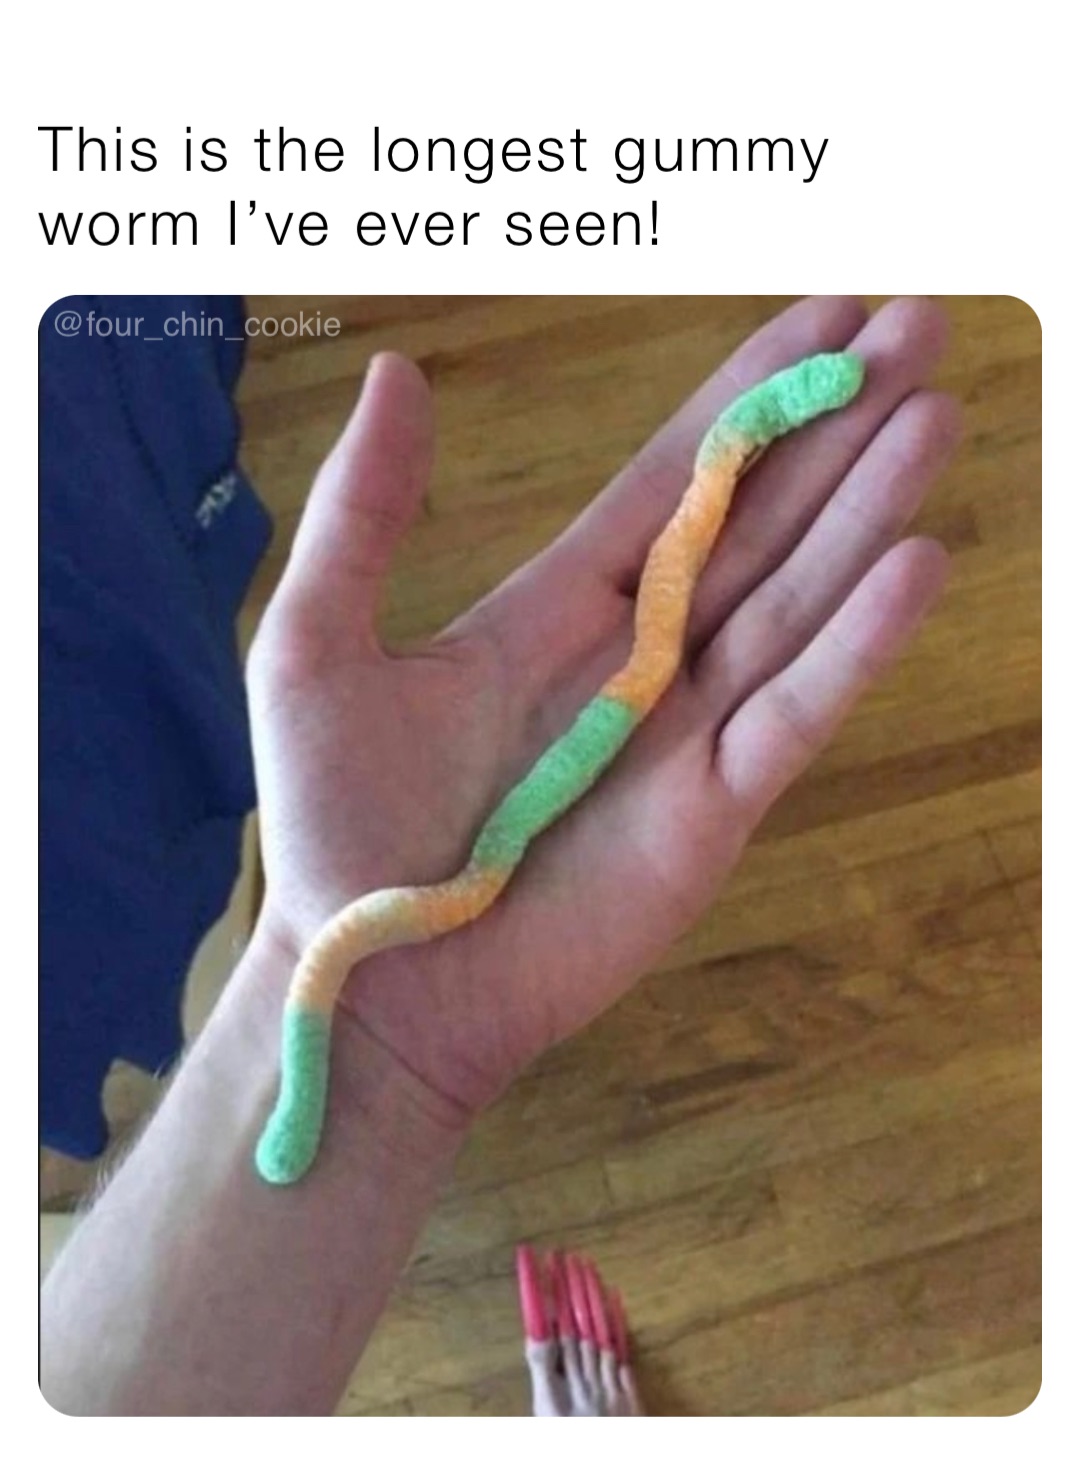 This is the longest gummy worm I’ve ever seen!